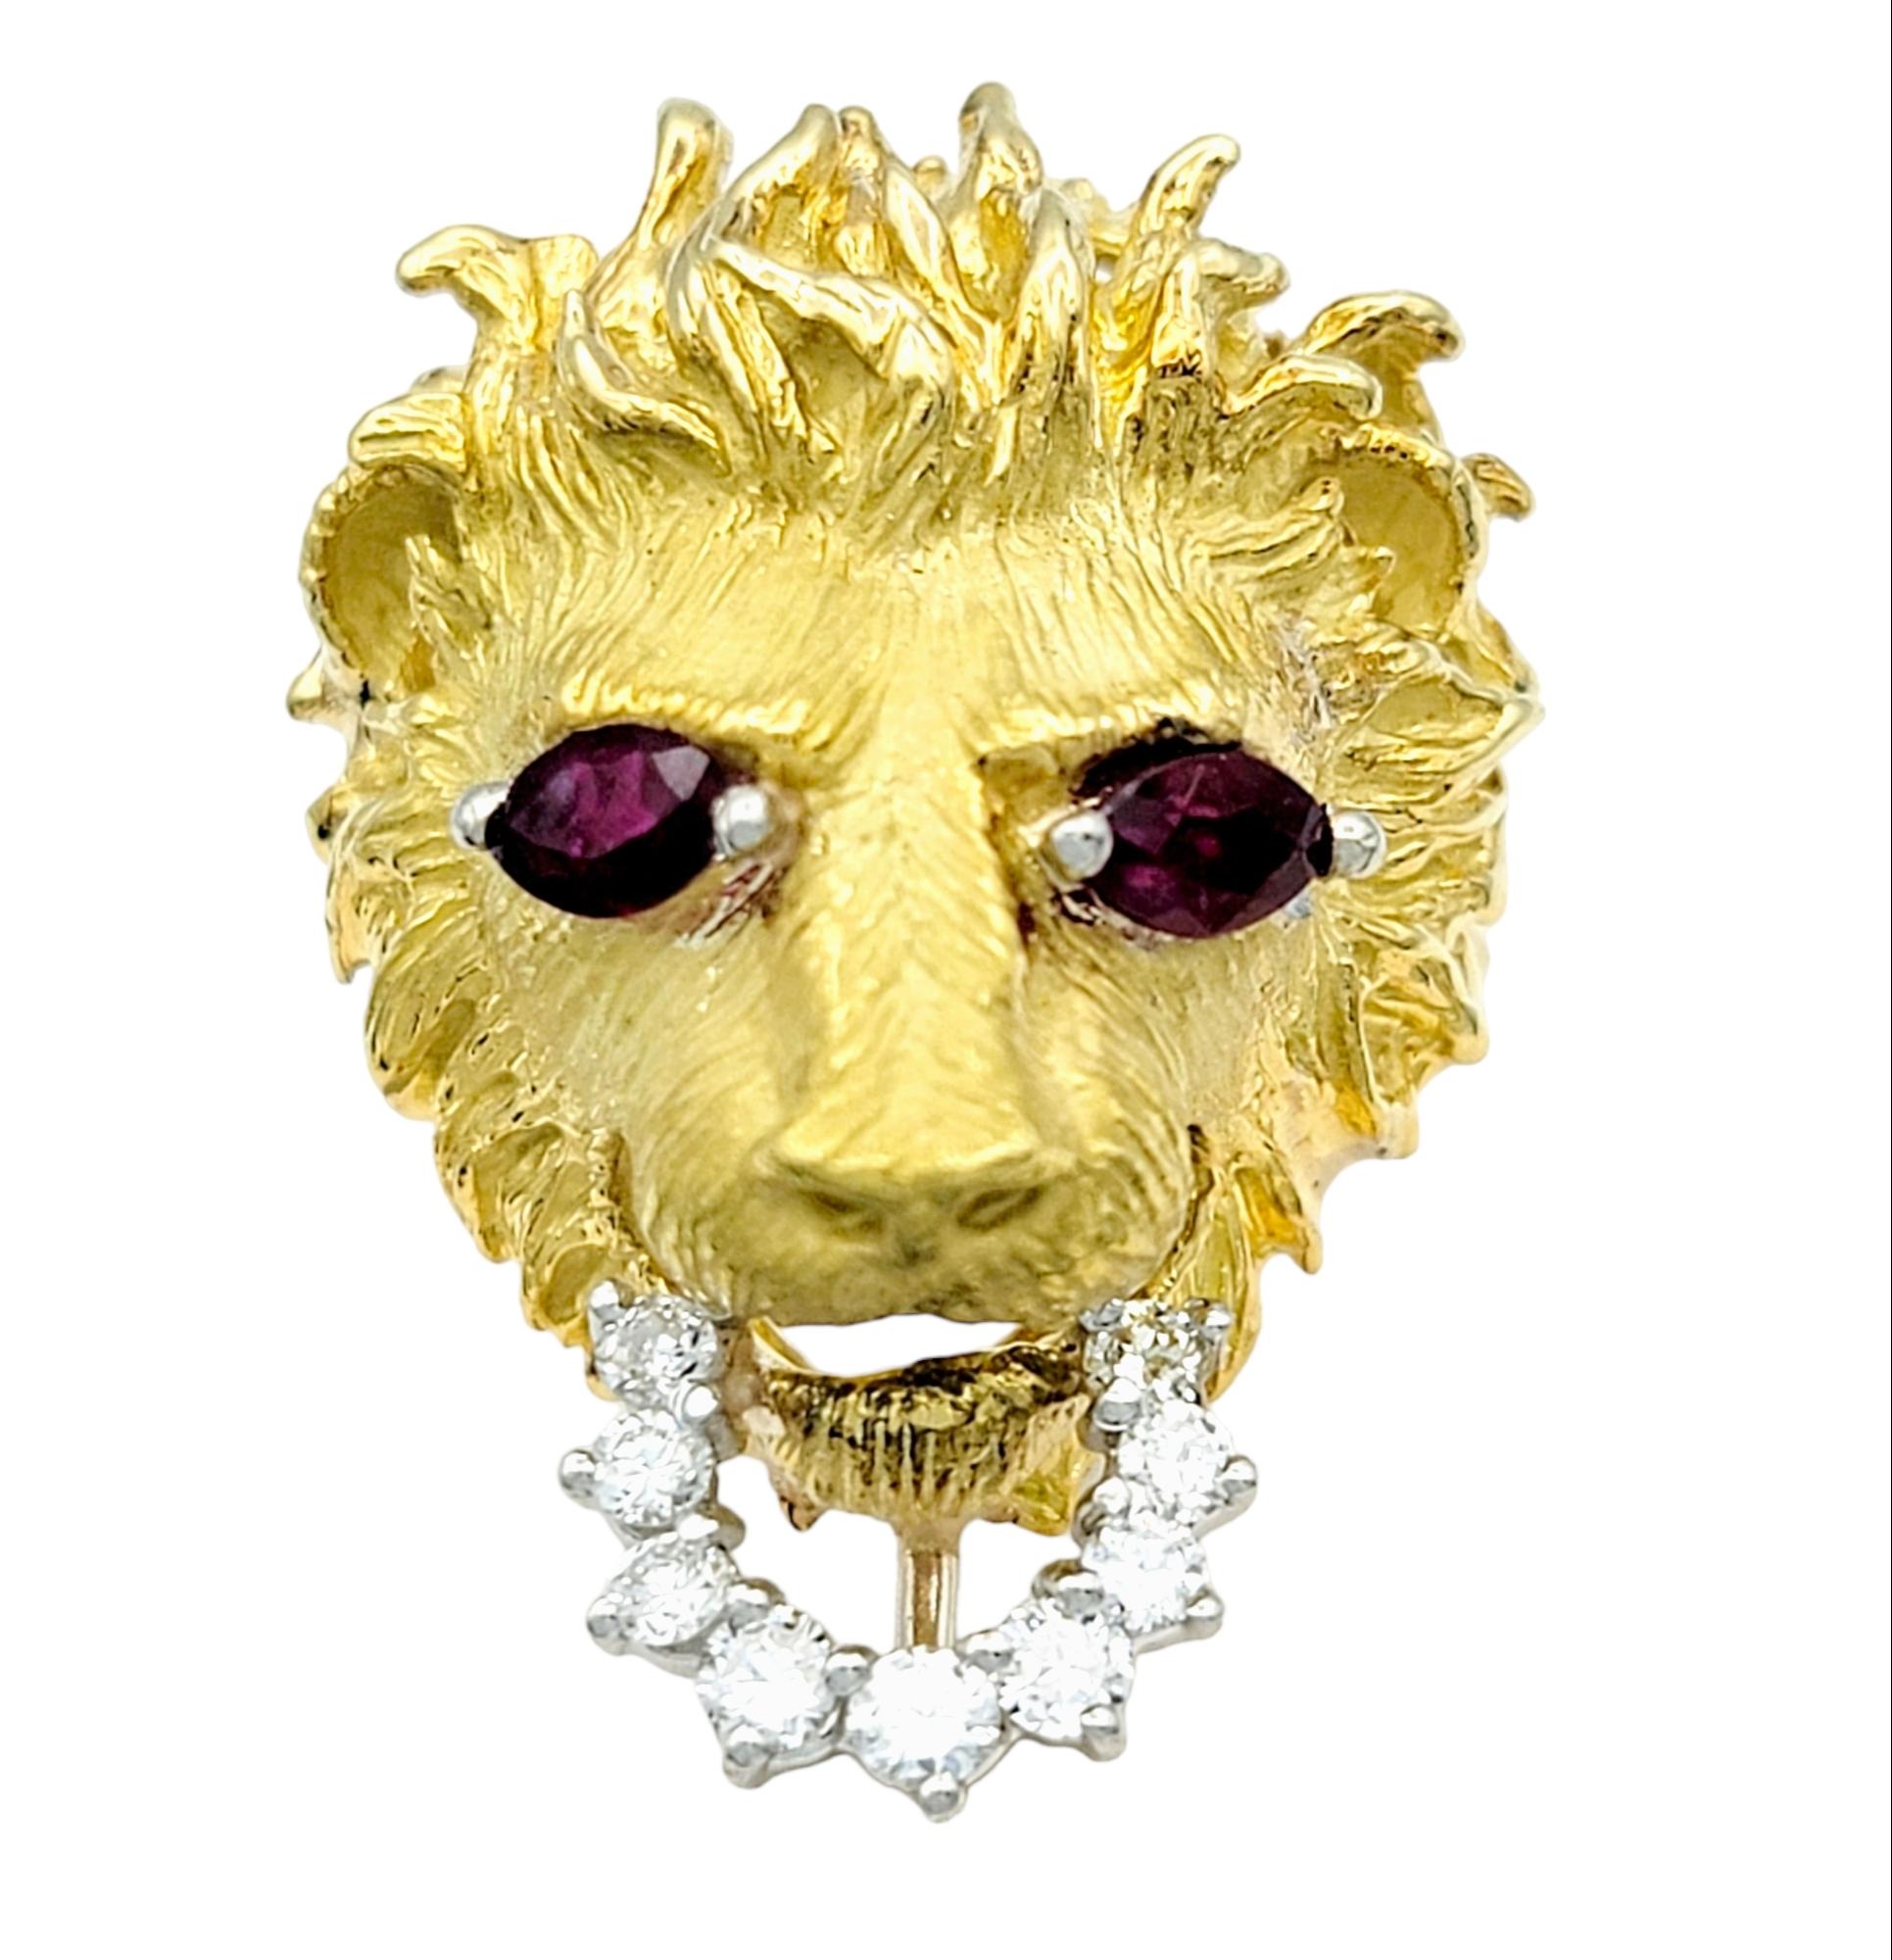 Ring size: 5.5

This striking carved lion head ring is a masterpiece of craftsmanship and elegance. This unique piece of jewelry combines nature with artistry and luxury to create a truly captivating accessory that will not go unnoticed.

Crafted